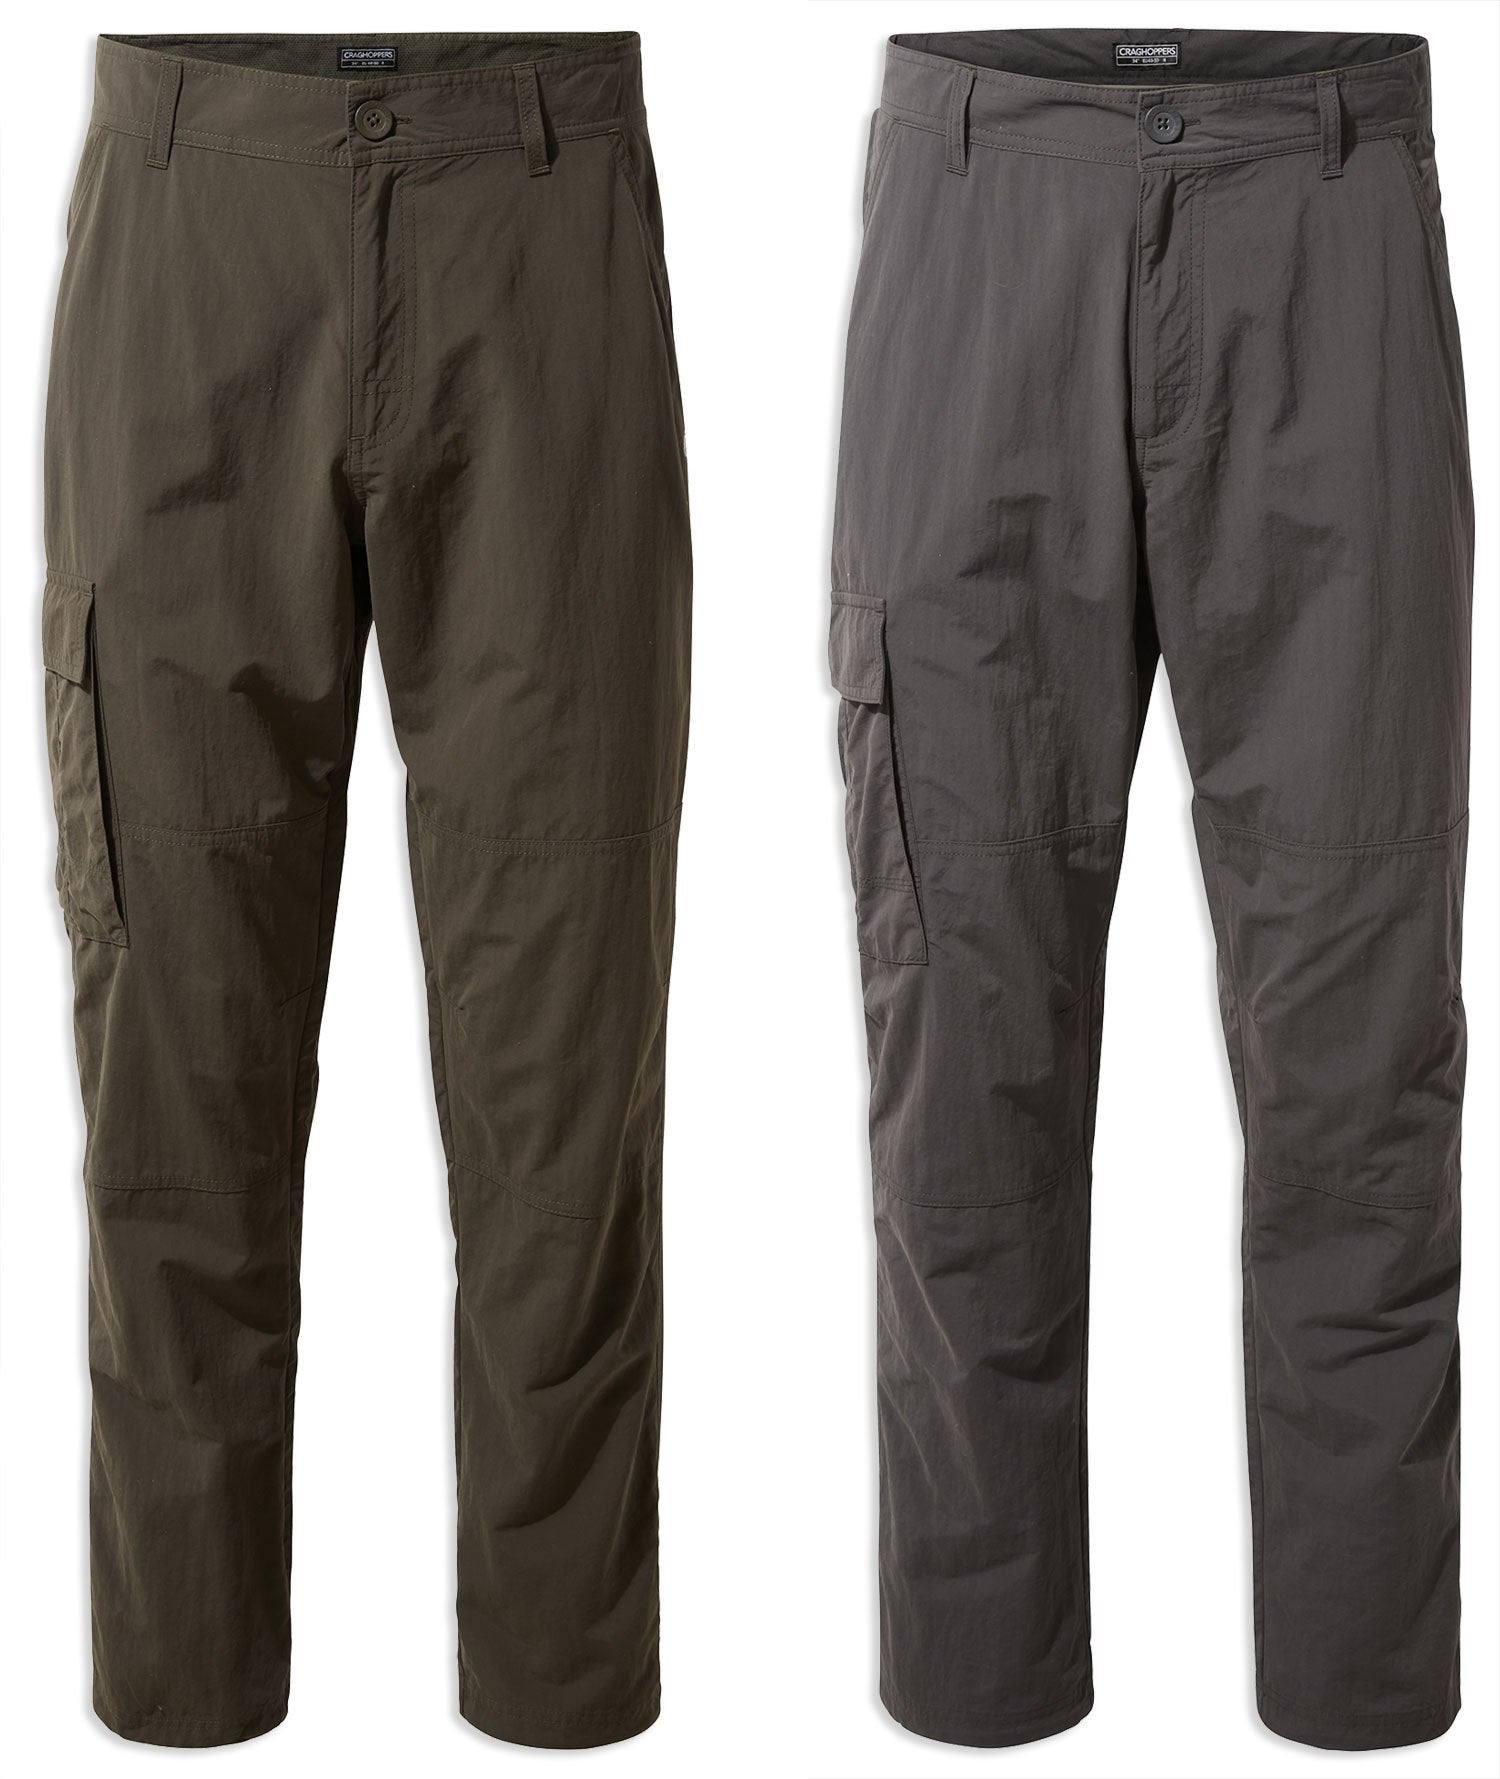 Craghoppers NosiLife Branco Trousers